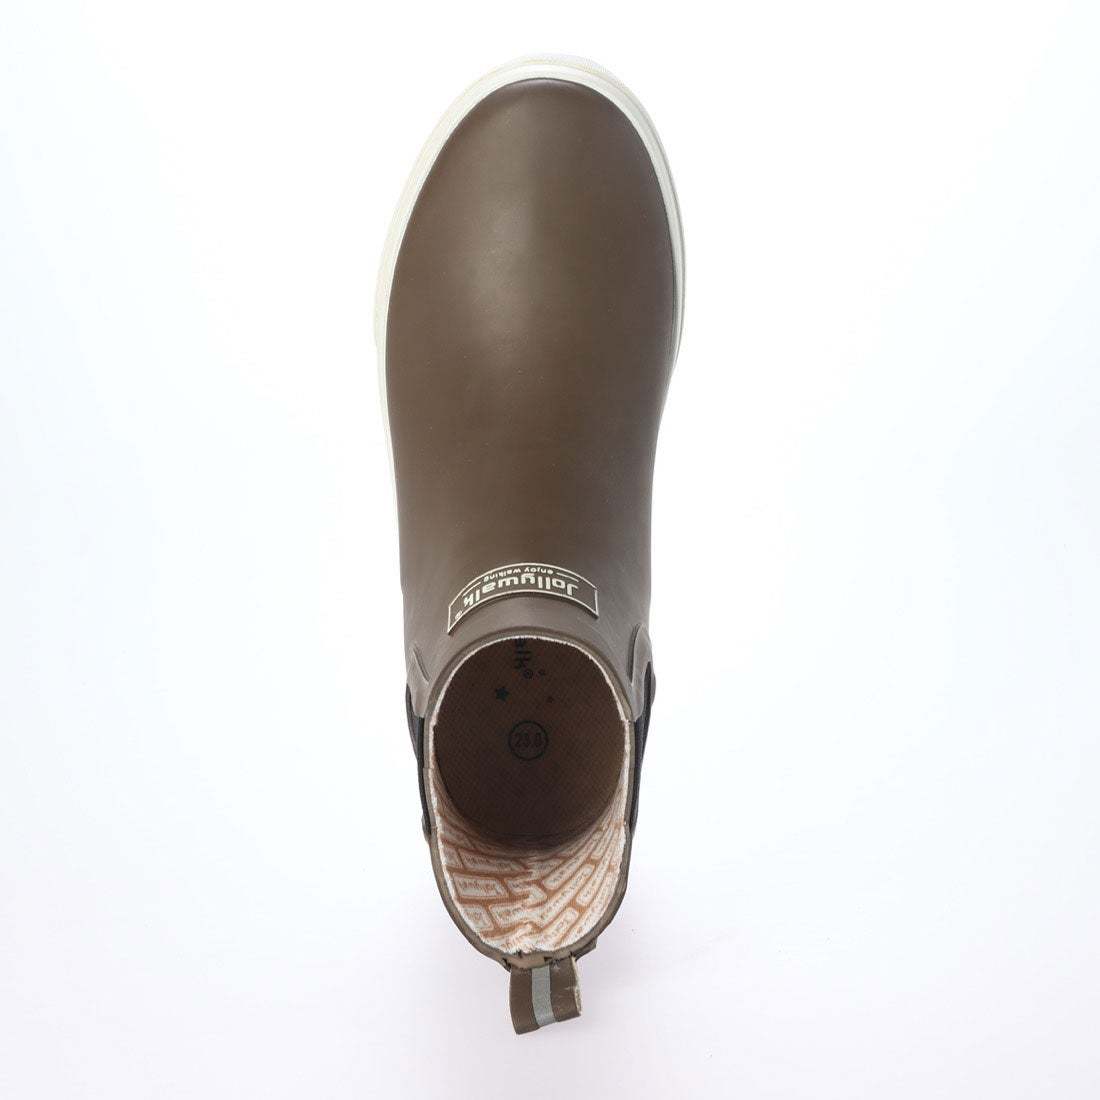  men's rain boots rain shoes boots rain shoes natural rubber material new goods [20088-BRN-255]25.5cm stock one . sale 